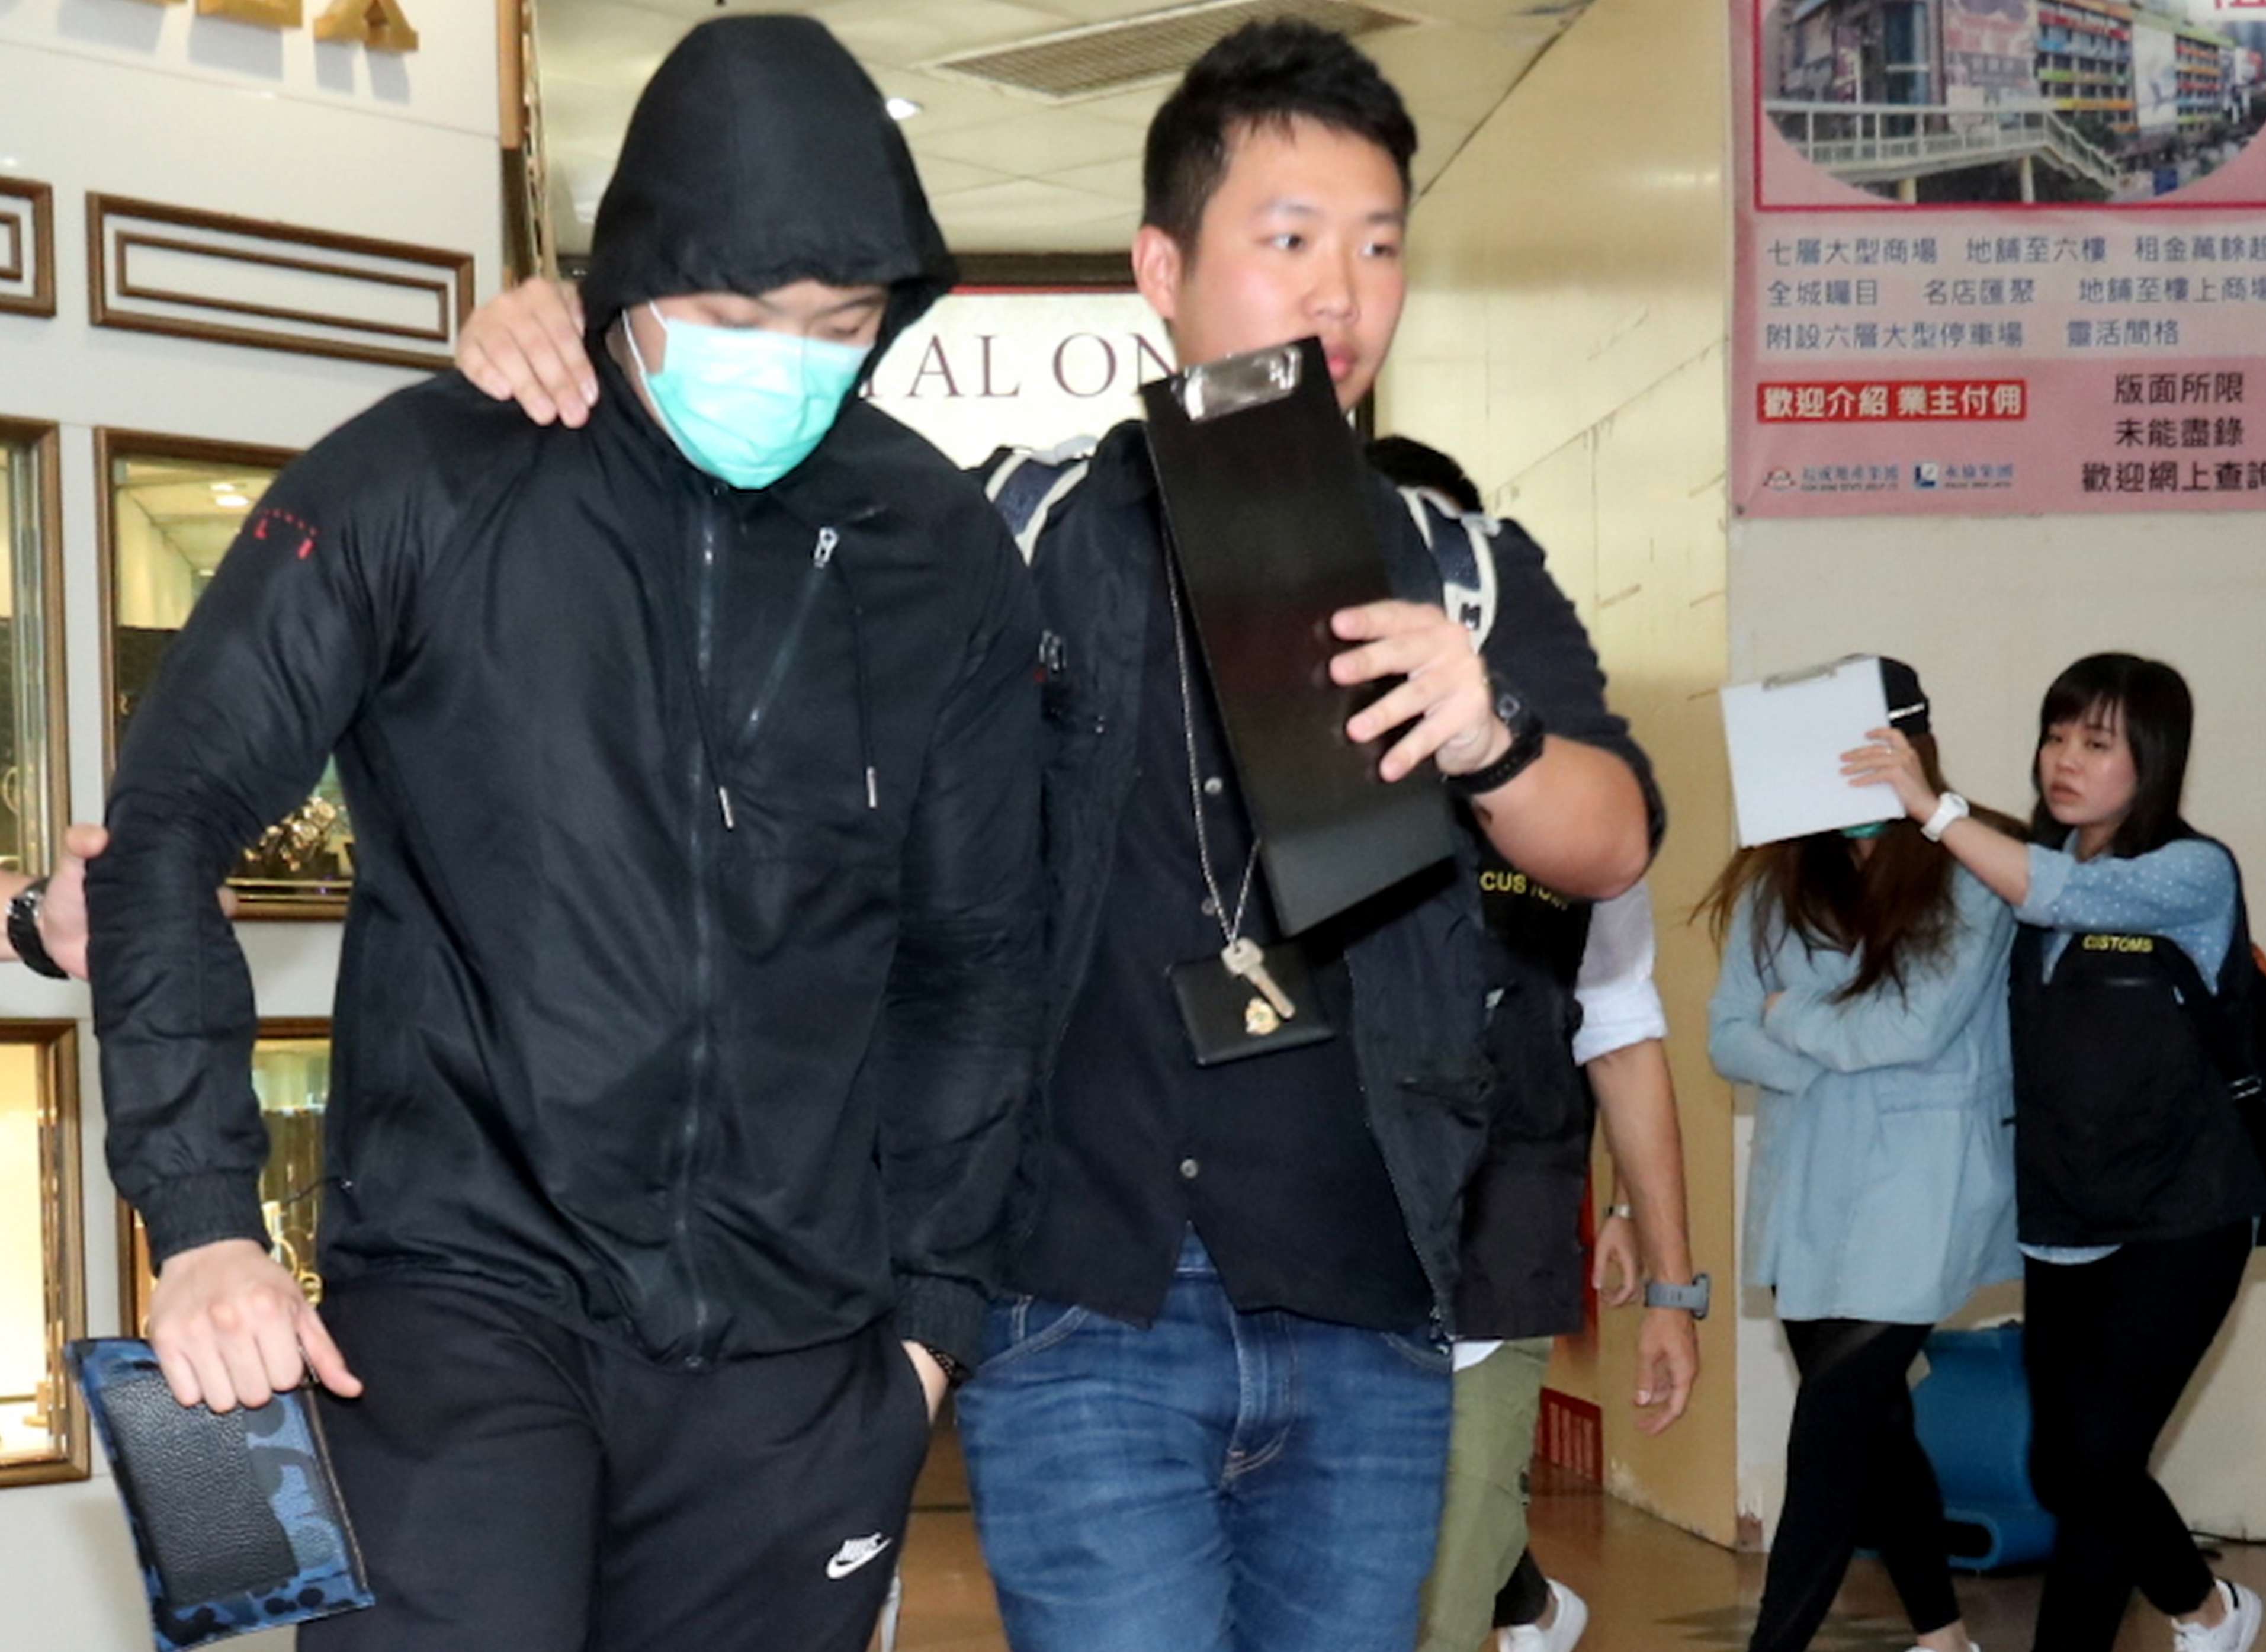 A Customs officer lead a worker from the gym. Photo: SCMP Pictures